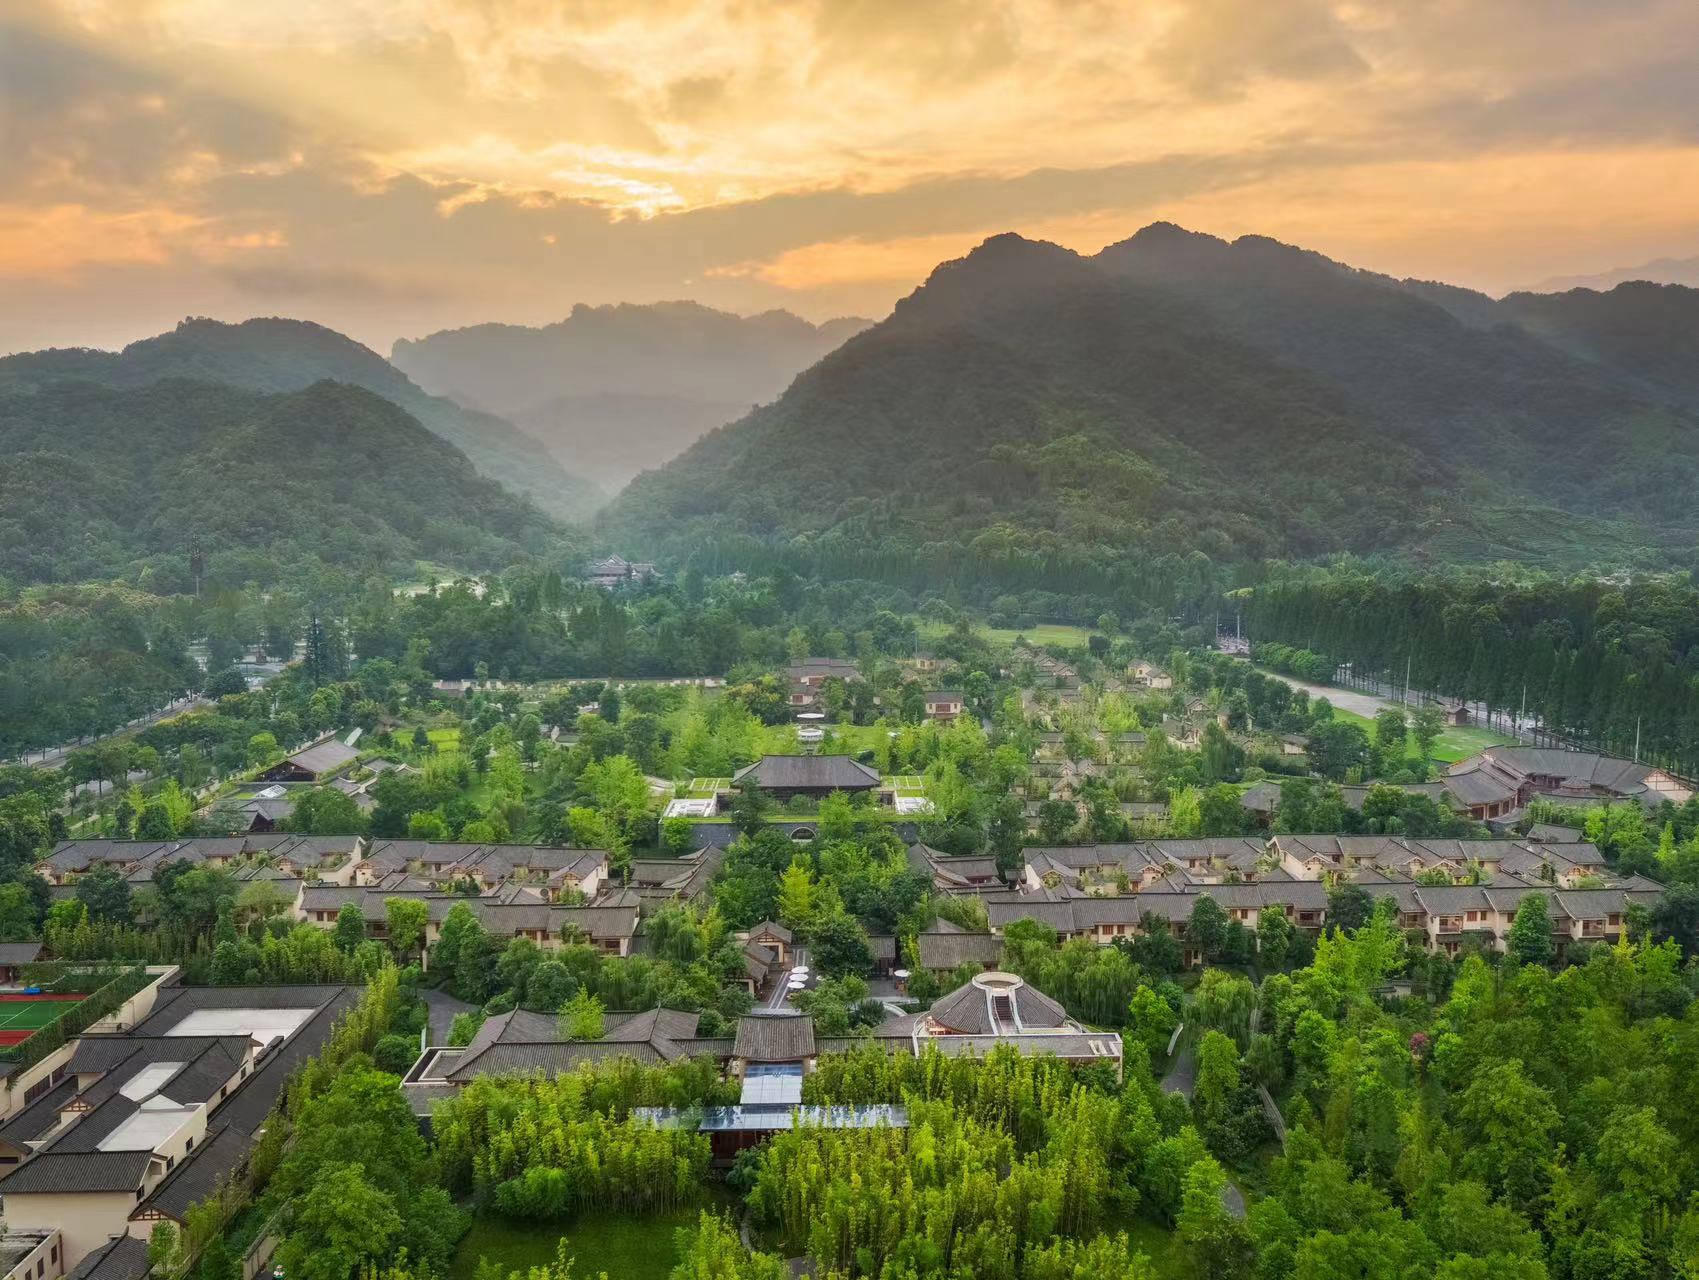 How Does Six Senses Create a “Sustainable” Idyll in a Luxury Hotel At the Foot of Qingcheng Mountain?